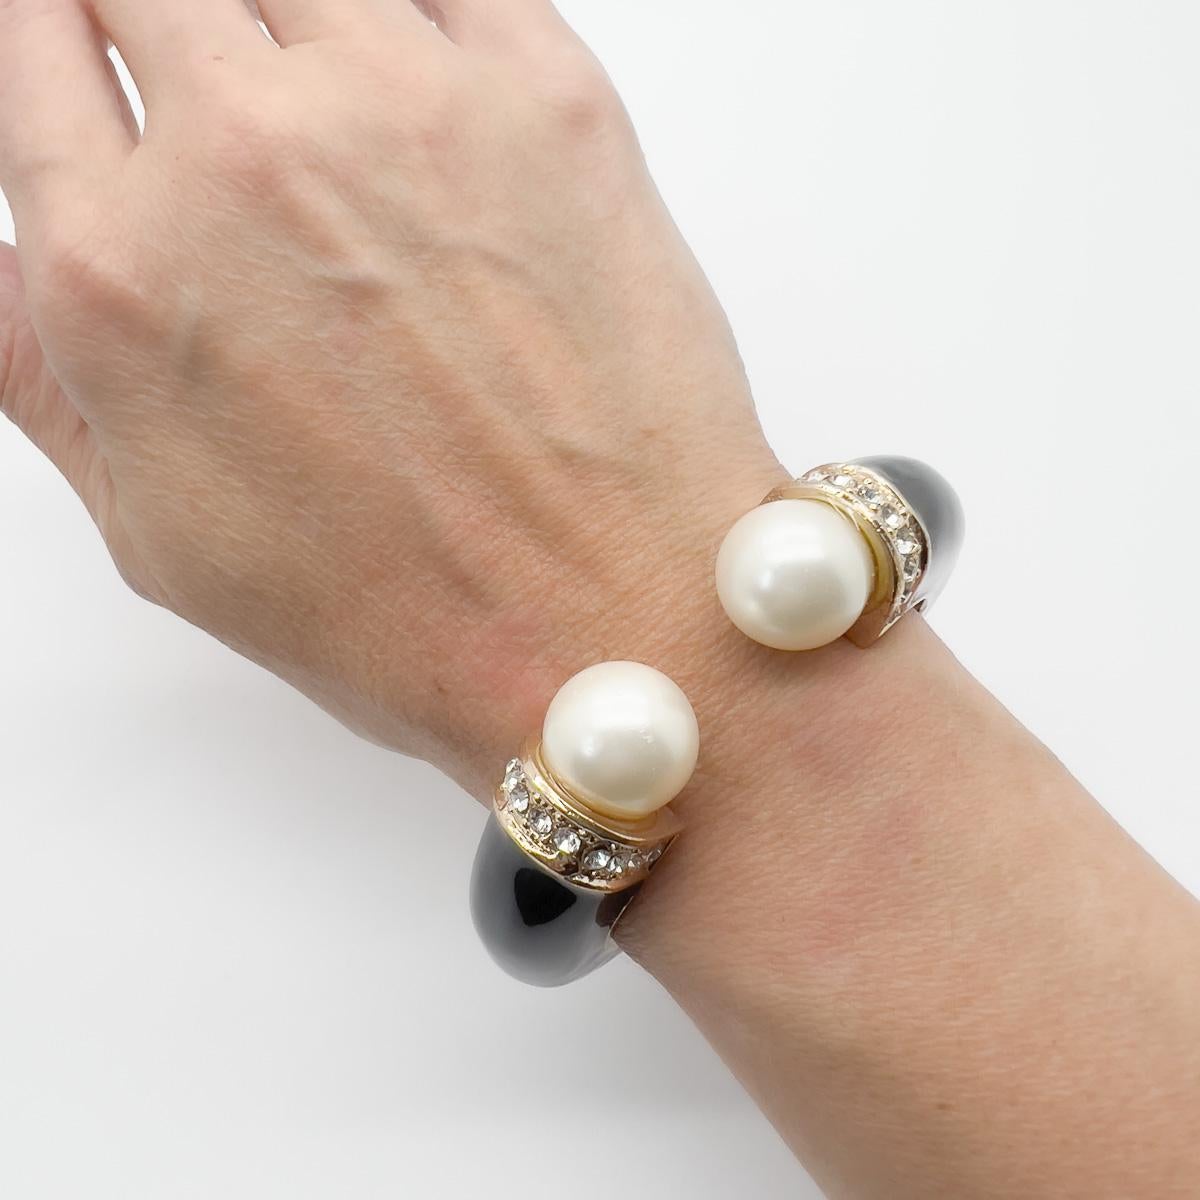 A stunning Vintage Enamel Pearl Torque Cuff. Timeless drama with this bold and beautiful cuff. The perfect final adornment.

An unsigned beauty. A rare treasure. Just because a jewel doesn’t carry a designer name, doesn’t mean it isn't coveted. The